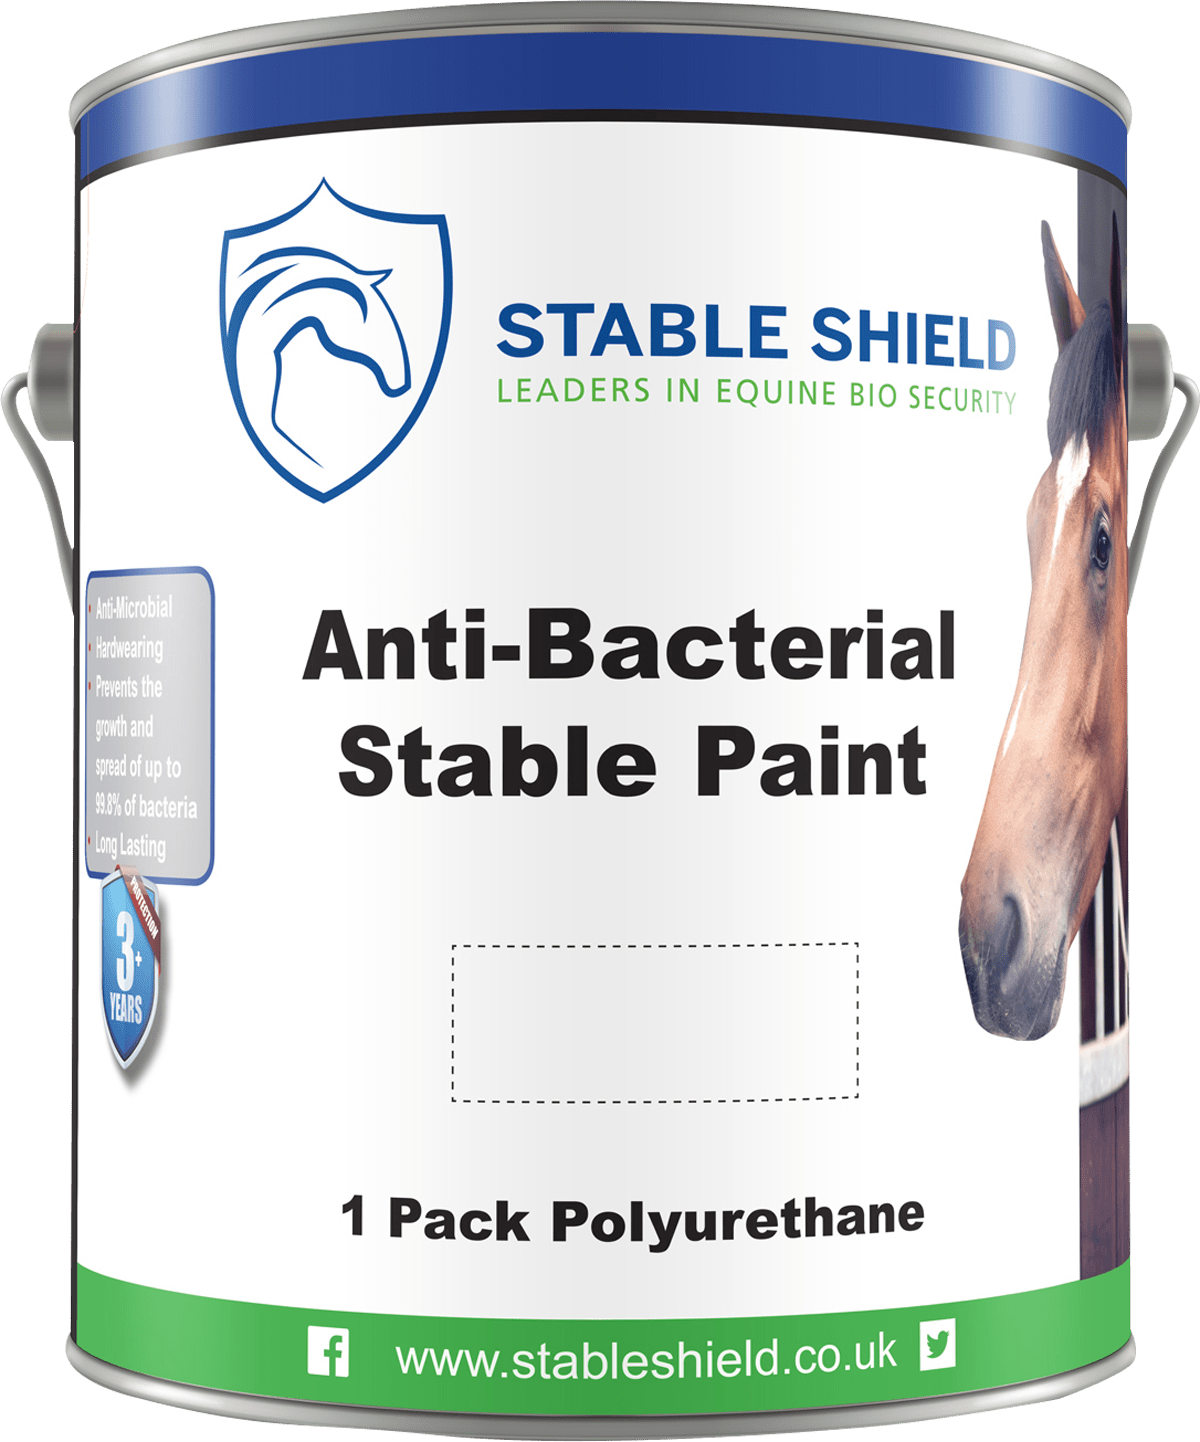 stableshield-antibacterial-stable-paint-1-pack-polyurethane